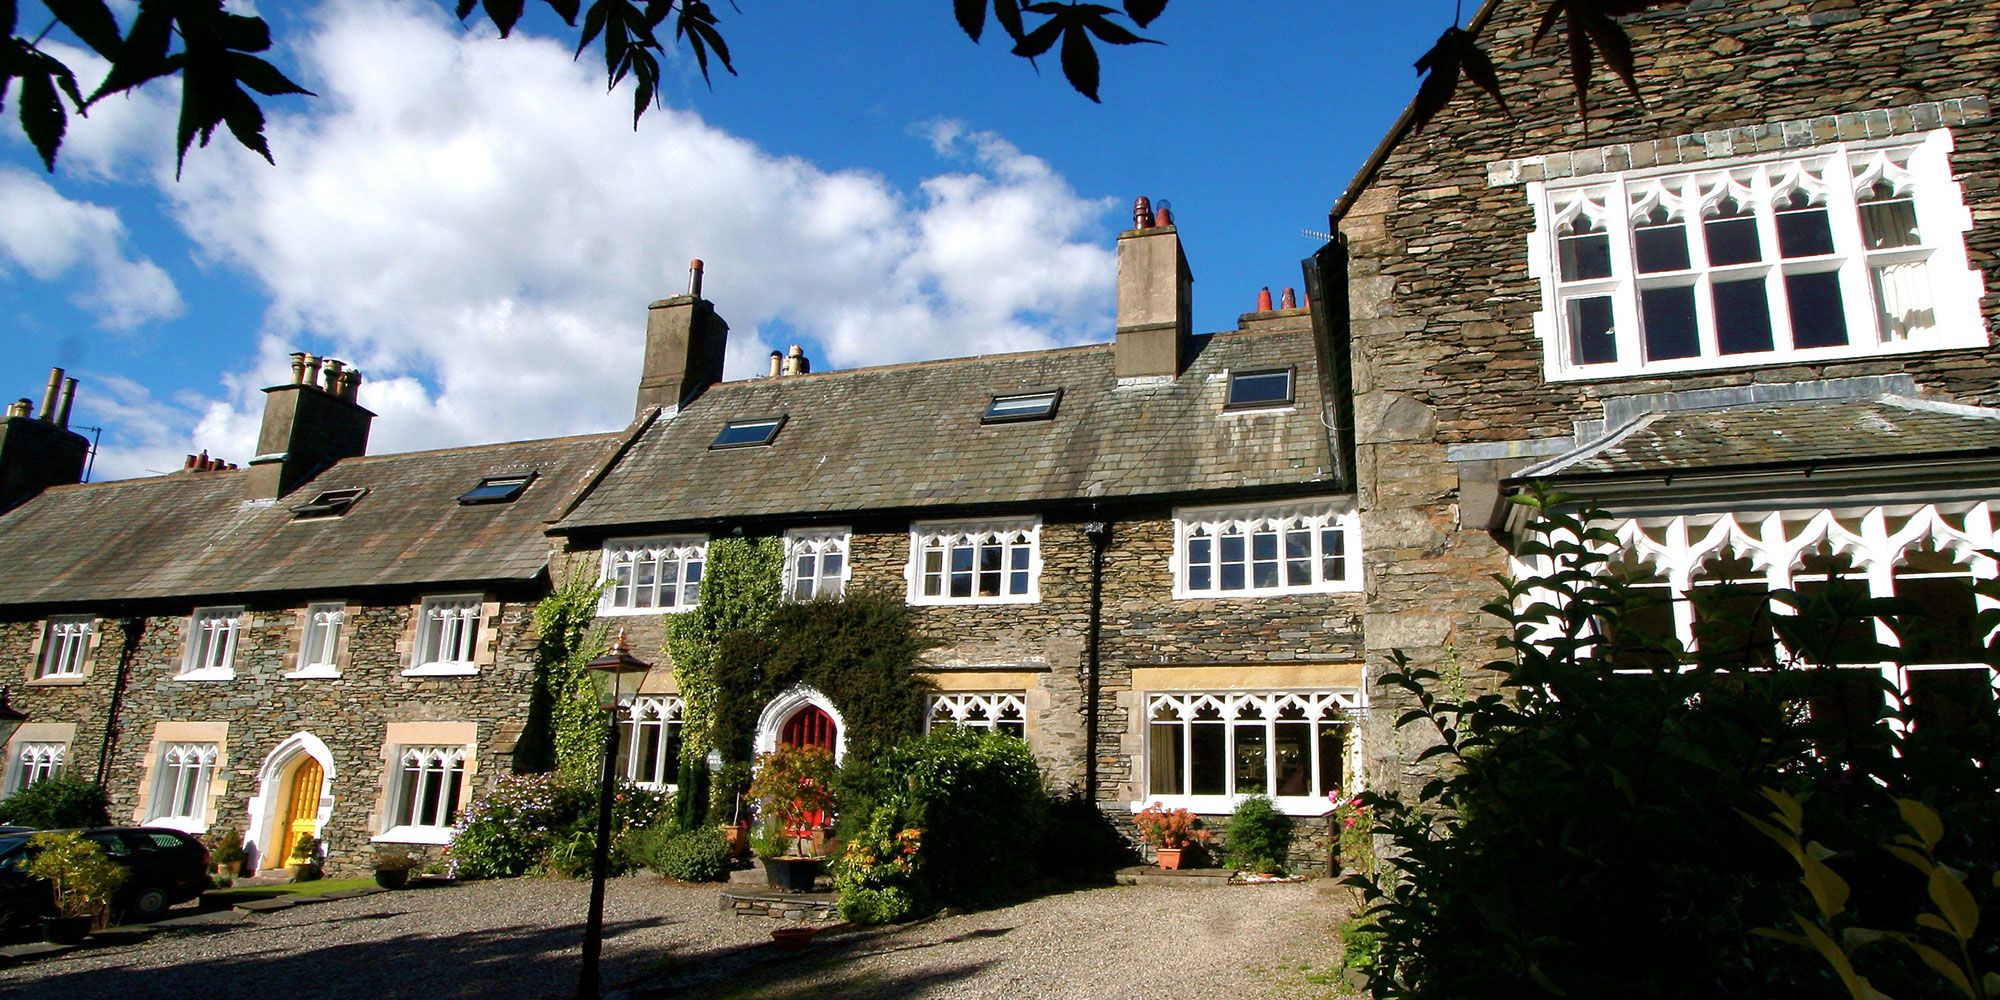 The Terrace cottages, Windermere